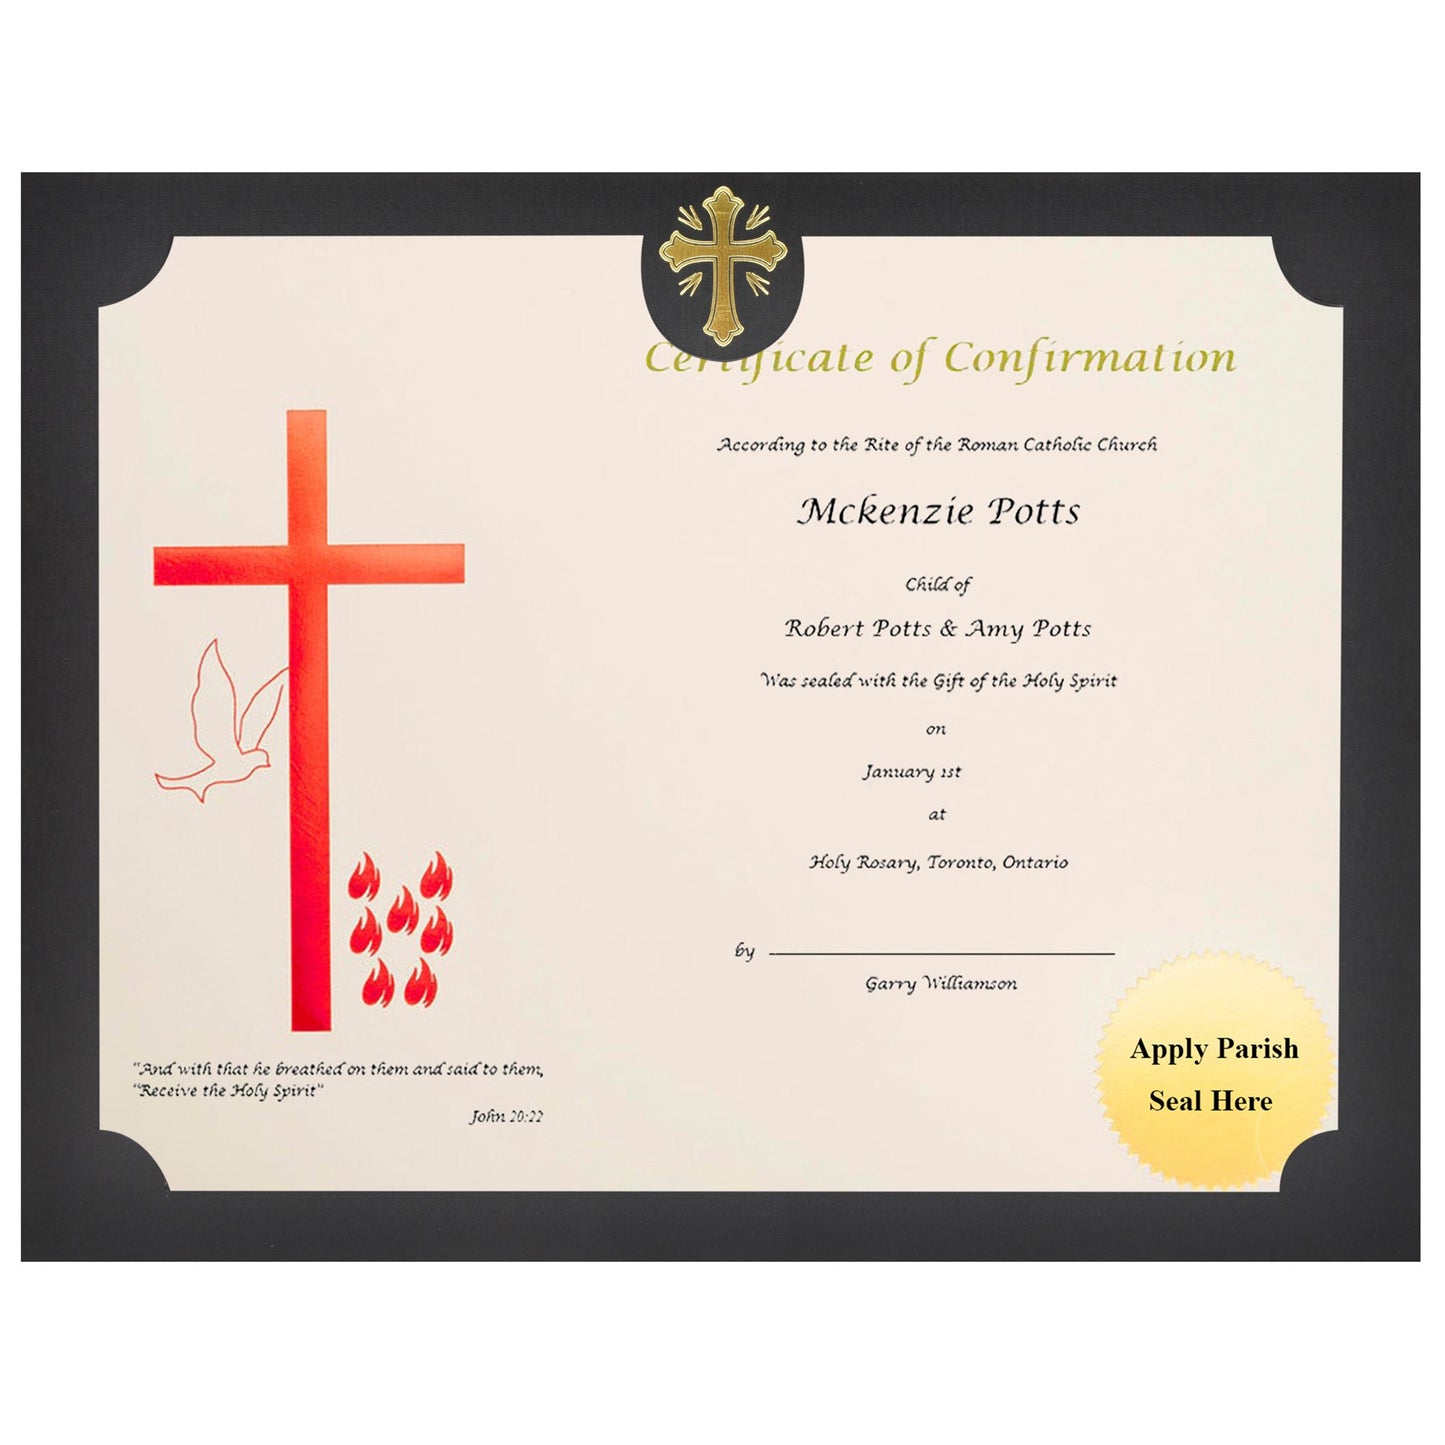 St. James® Religious Certificates - Confirmation Certificates, 65 lb, Red Foil, Ivory Card Stock, Pack of 50